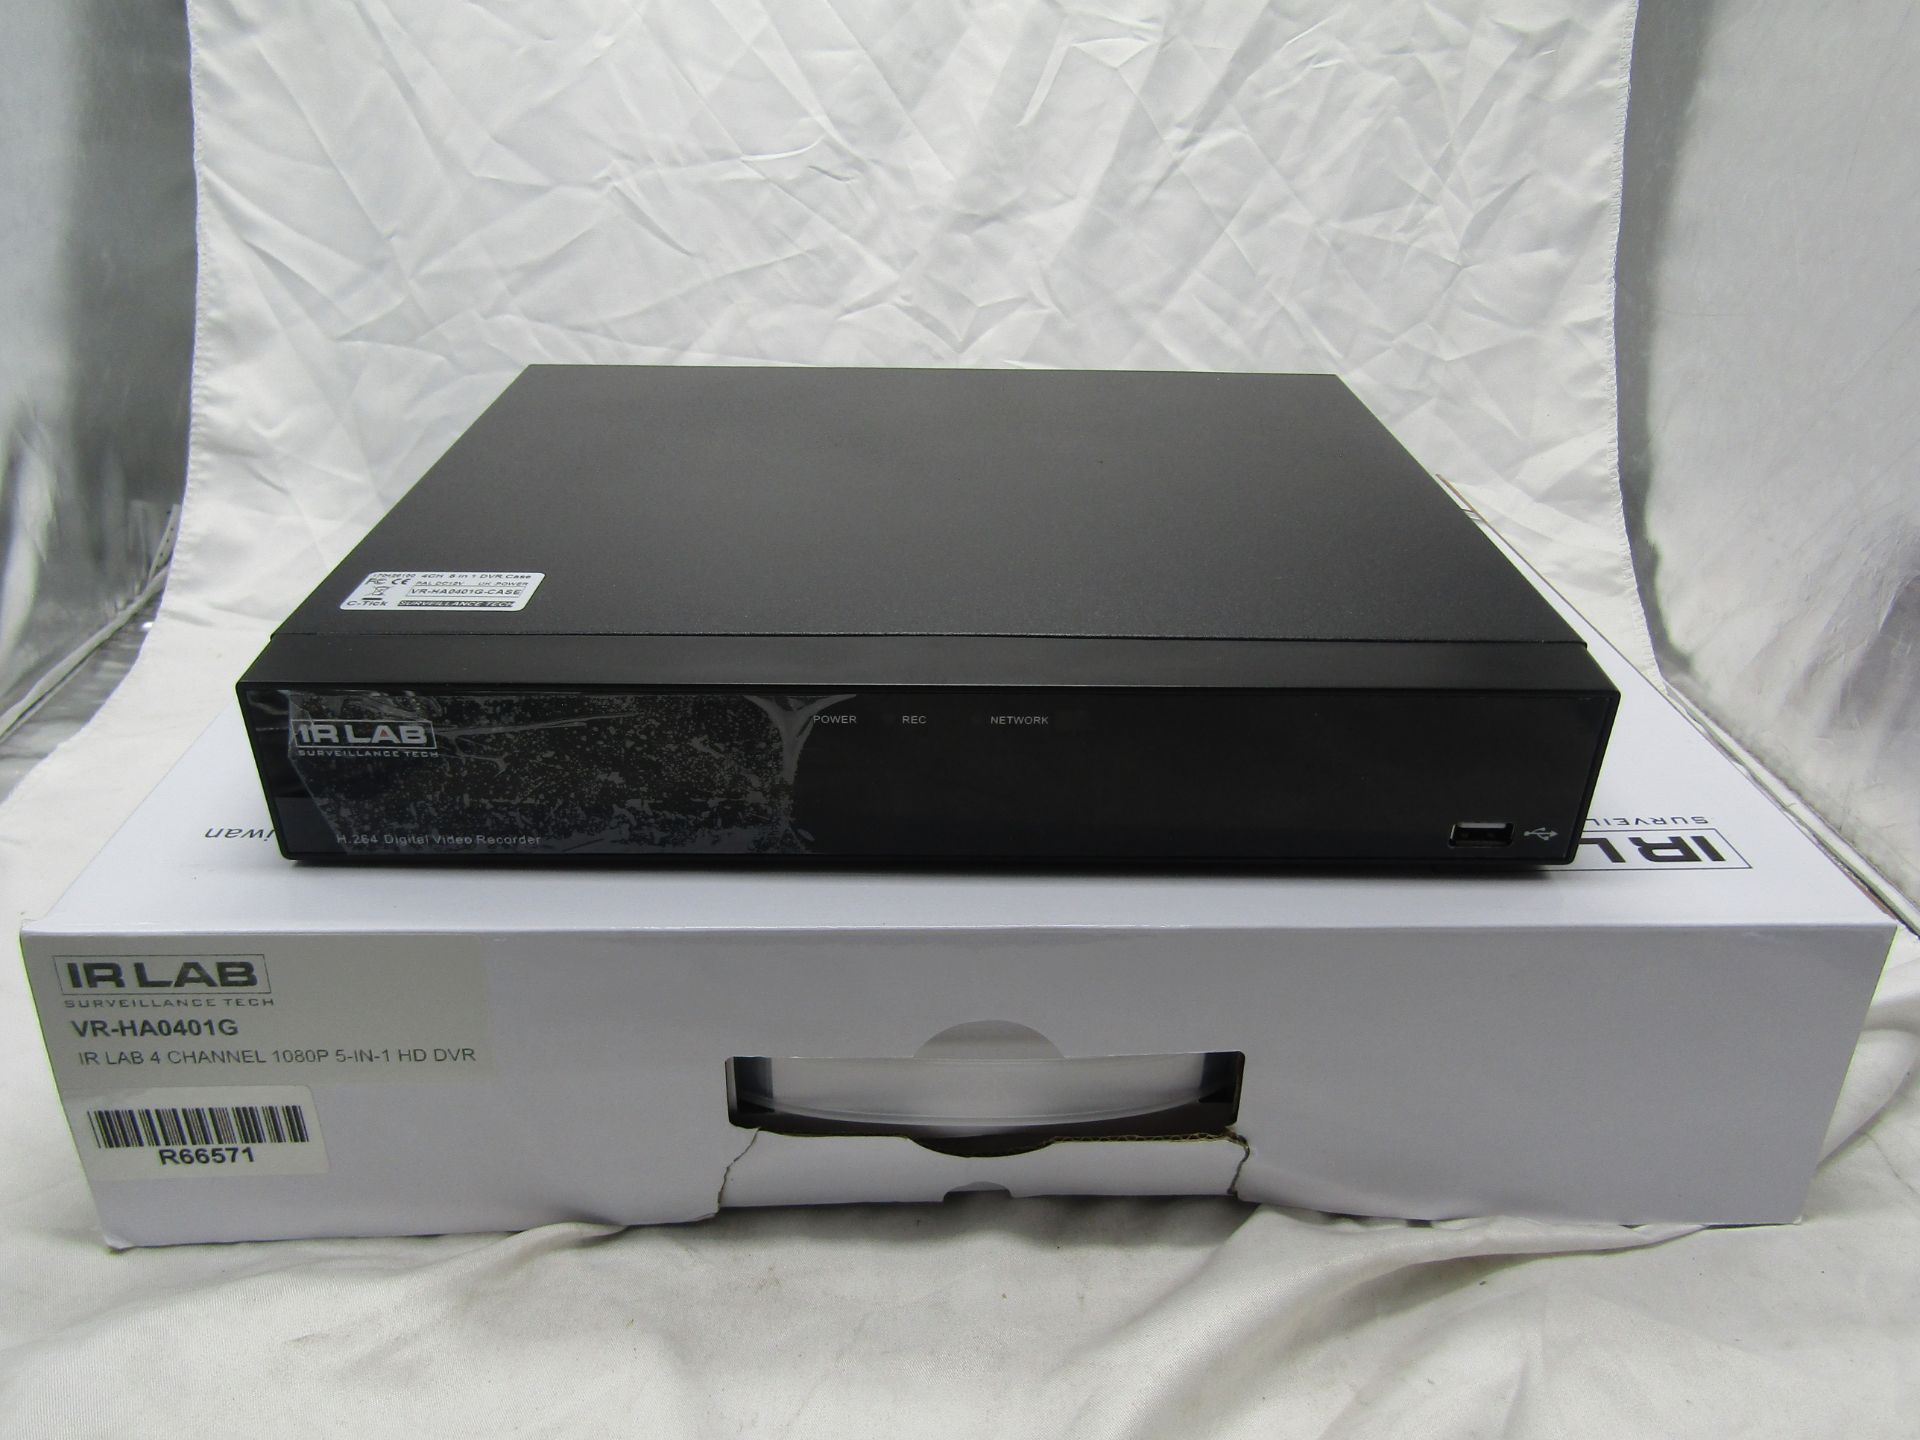 one lot of over 200 items of CCTV and Surveillance equipment, includes DVRs, Cameras, Thermal - Image 8 of 104